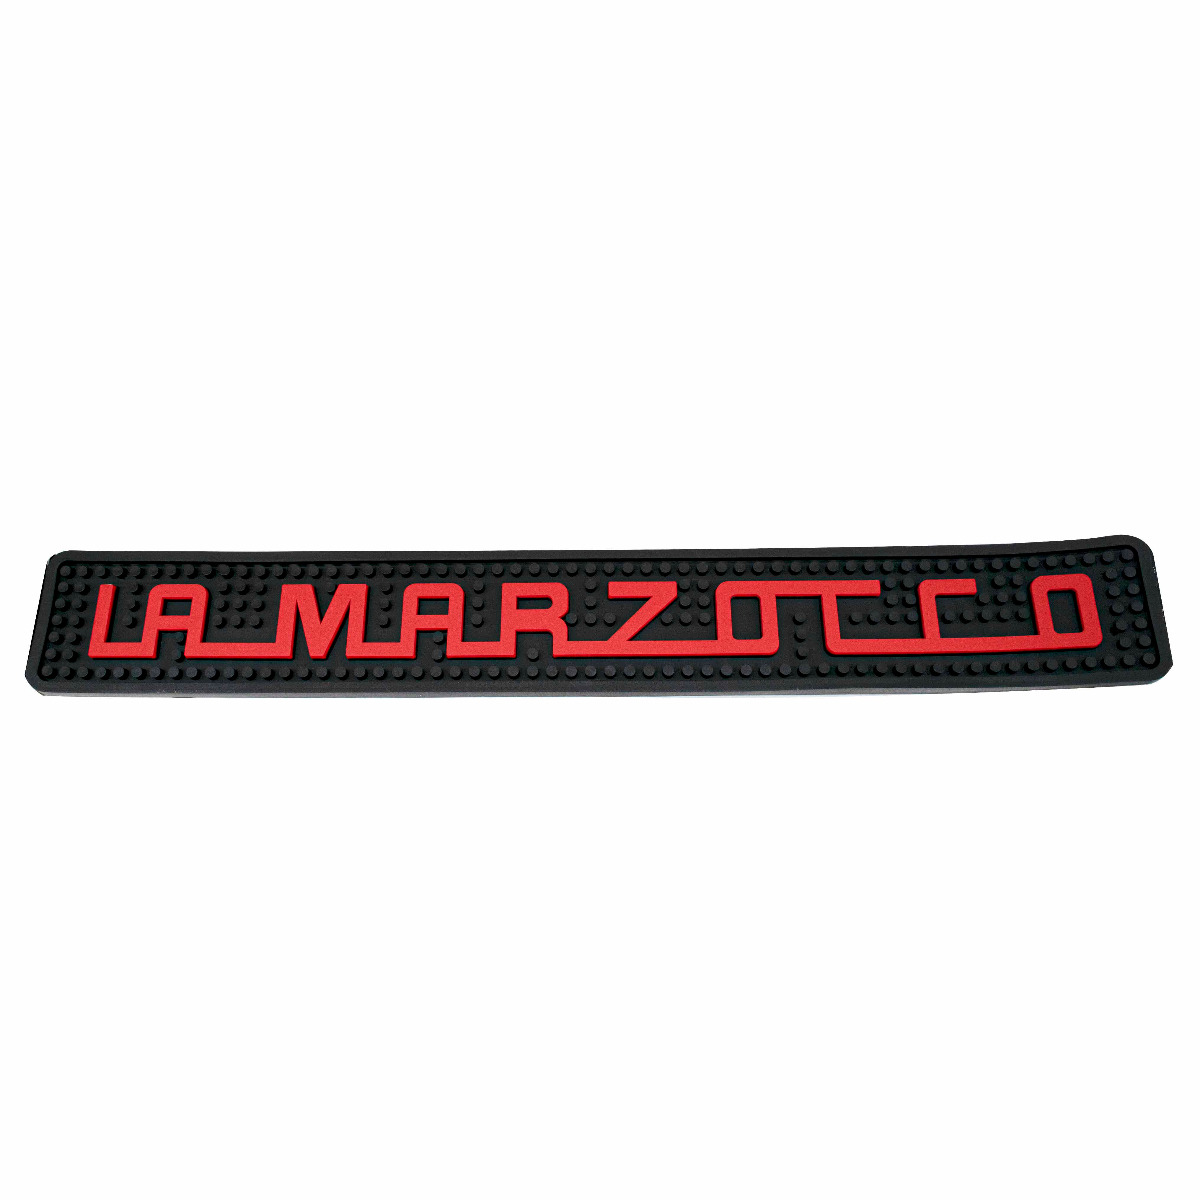 Coffee cup drying mat la marzocco 60x8-KR011597